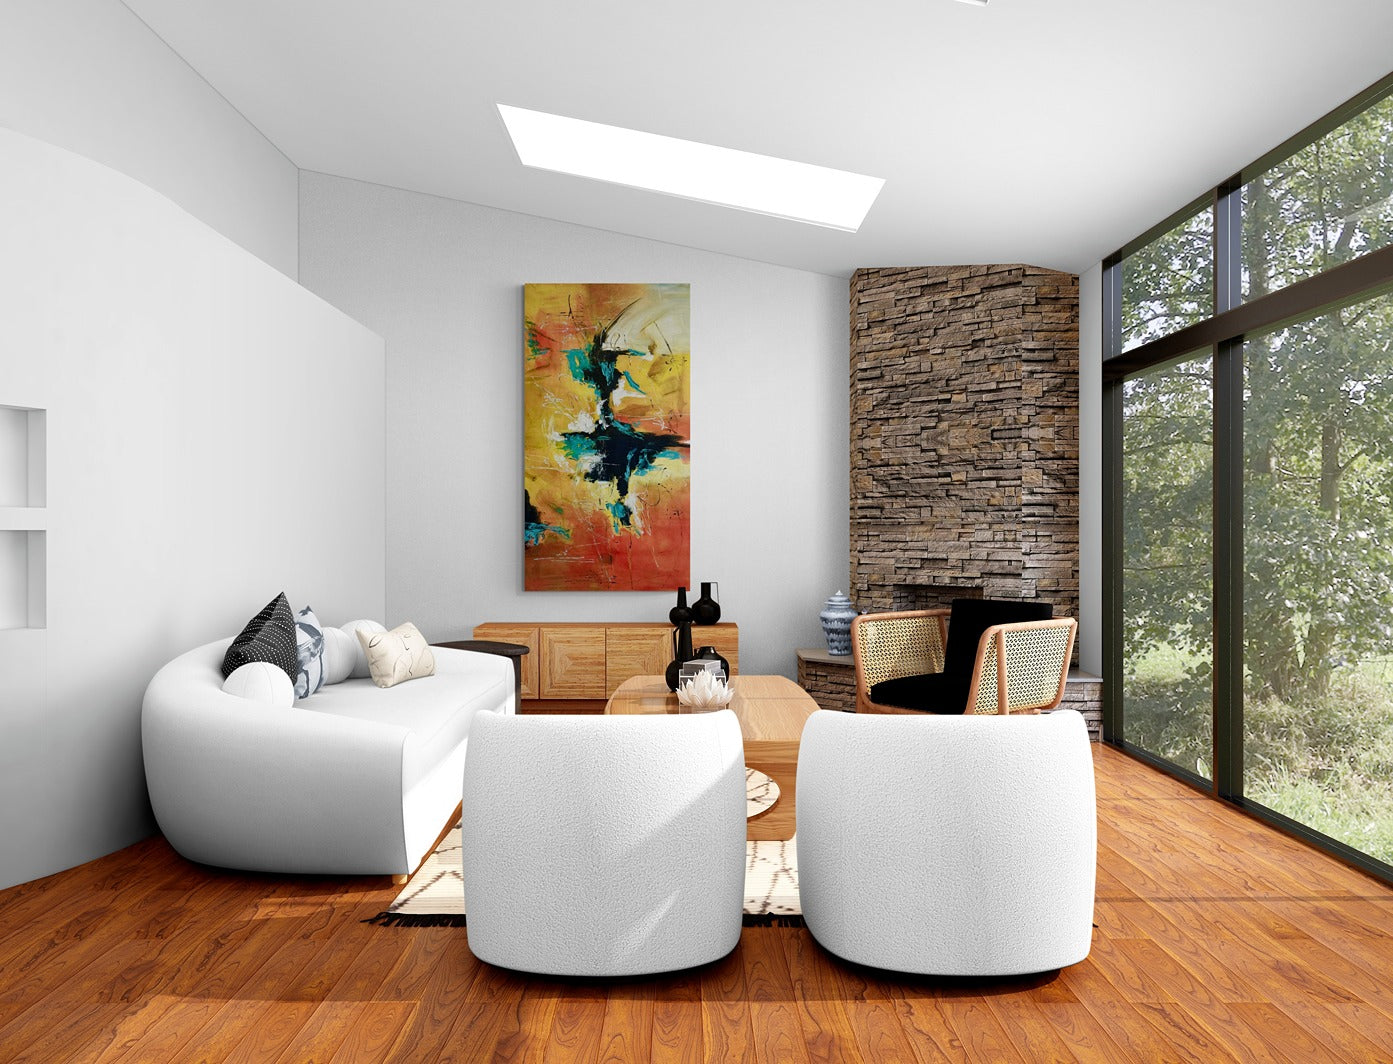 Original hand-painted abstract canvas wall art enhances the modern living room with scenic views, adding artistic vibrancy to the space.